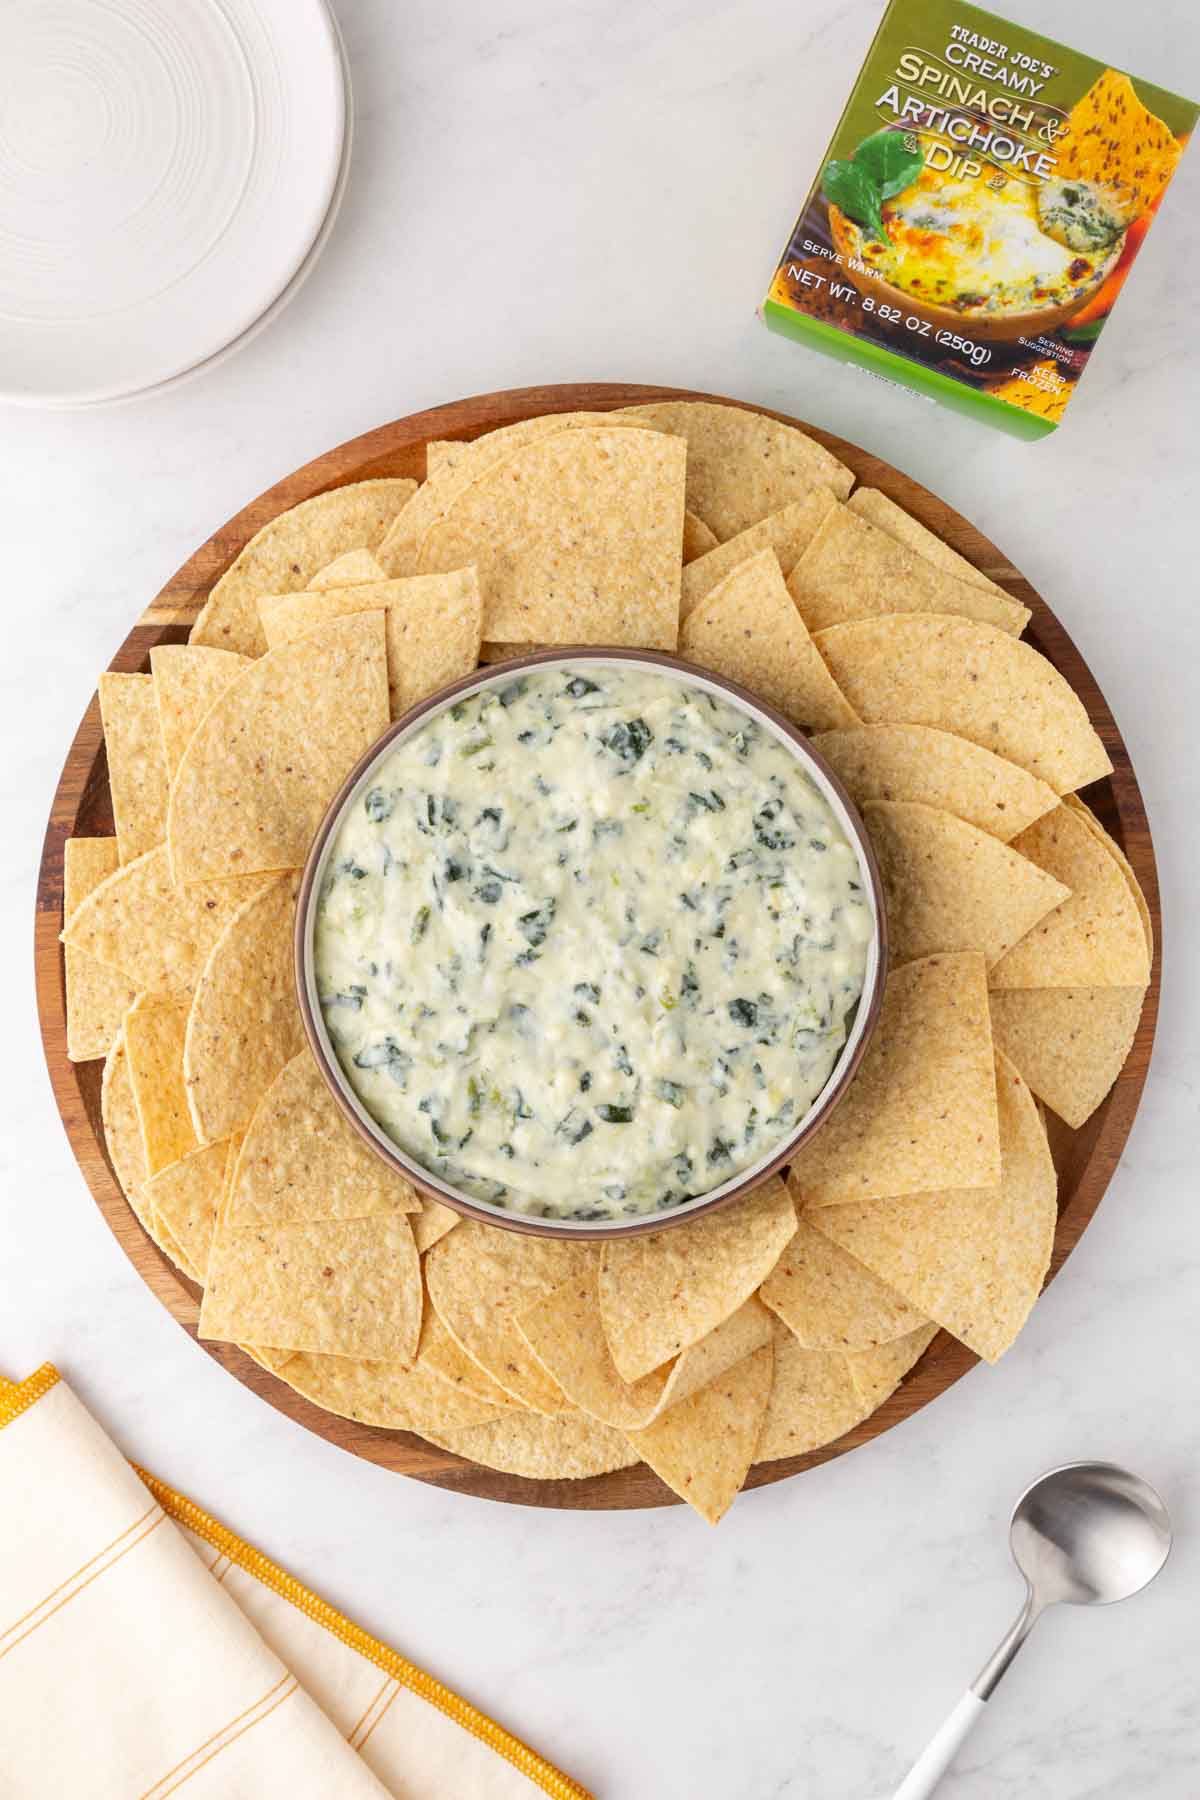 Trader Joe's Spinach and Artichoke Dip in a bowl surrounded by tortilla chips.